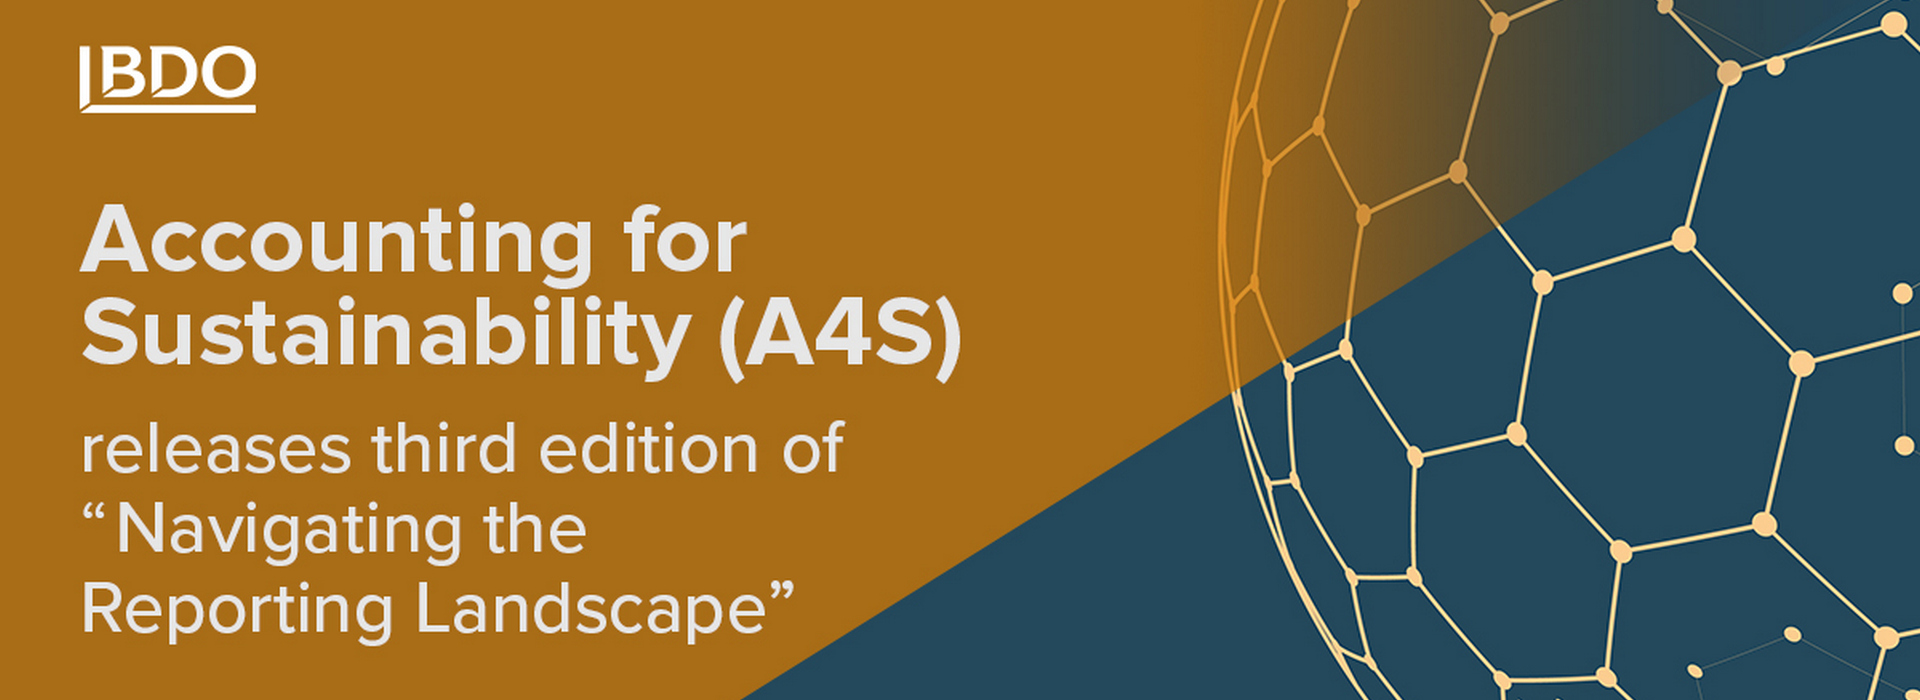 Accounting for Sustainability (A4S) Releases Third Edition of “Navigating the Reporting Landscape”